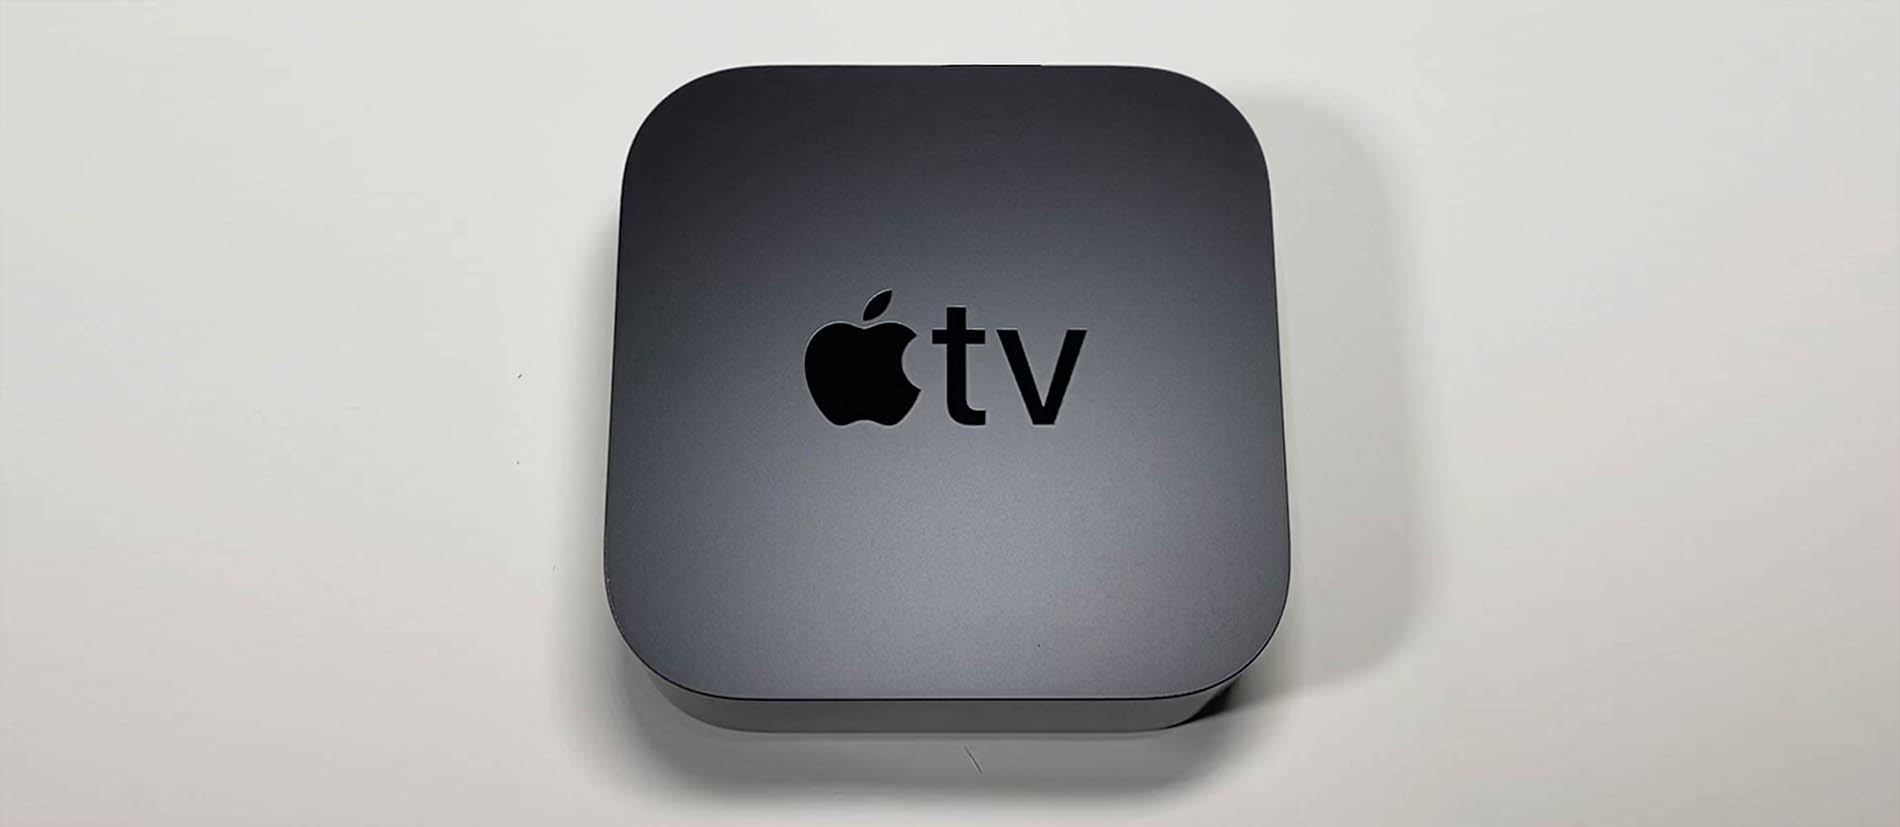 Apple TV's latest software update, tvOS 15, launches September 20th — here's what to expect

